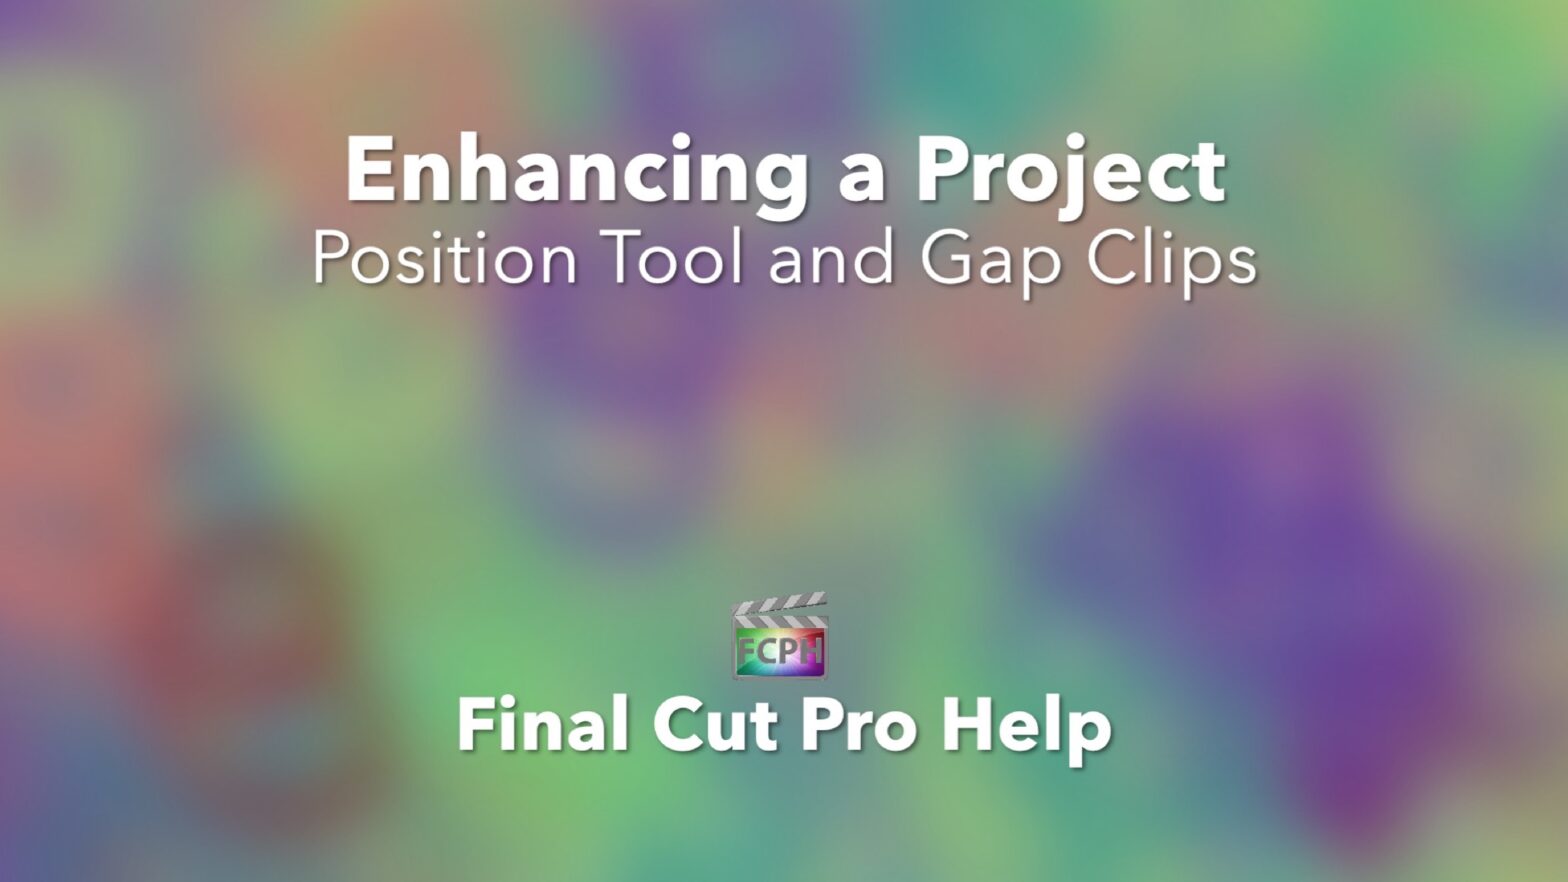 Enhancing a Project Position Tool and Gap Clips